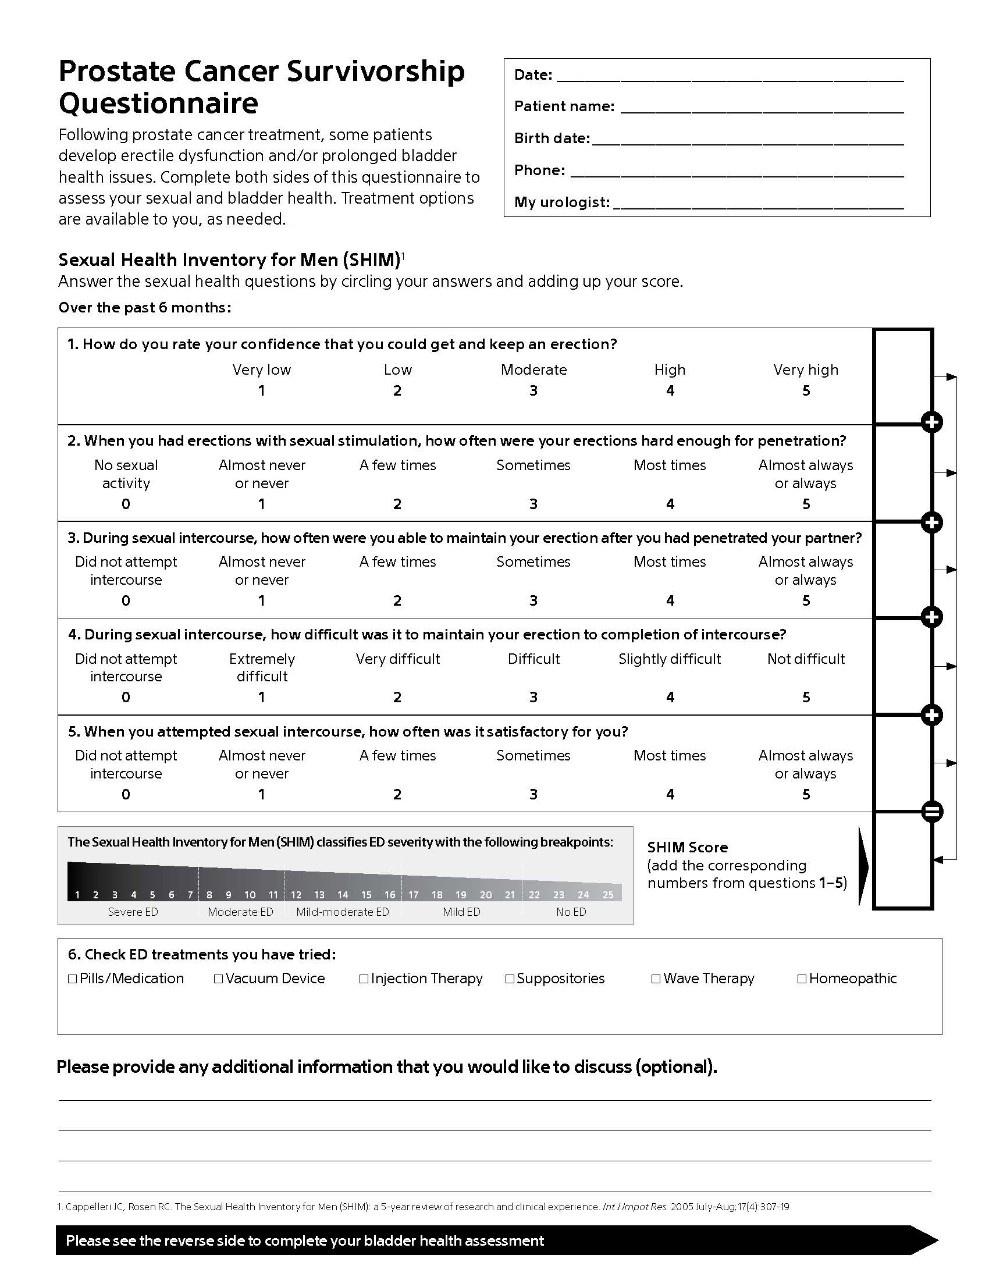 Prostate Cancer Questionnaire with SHIM